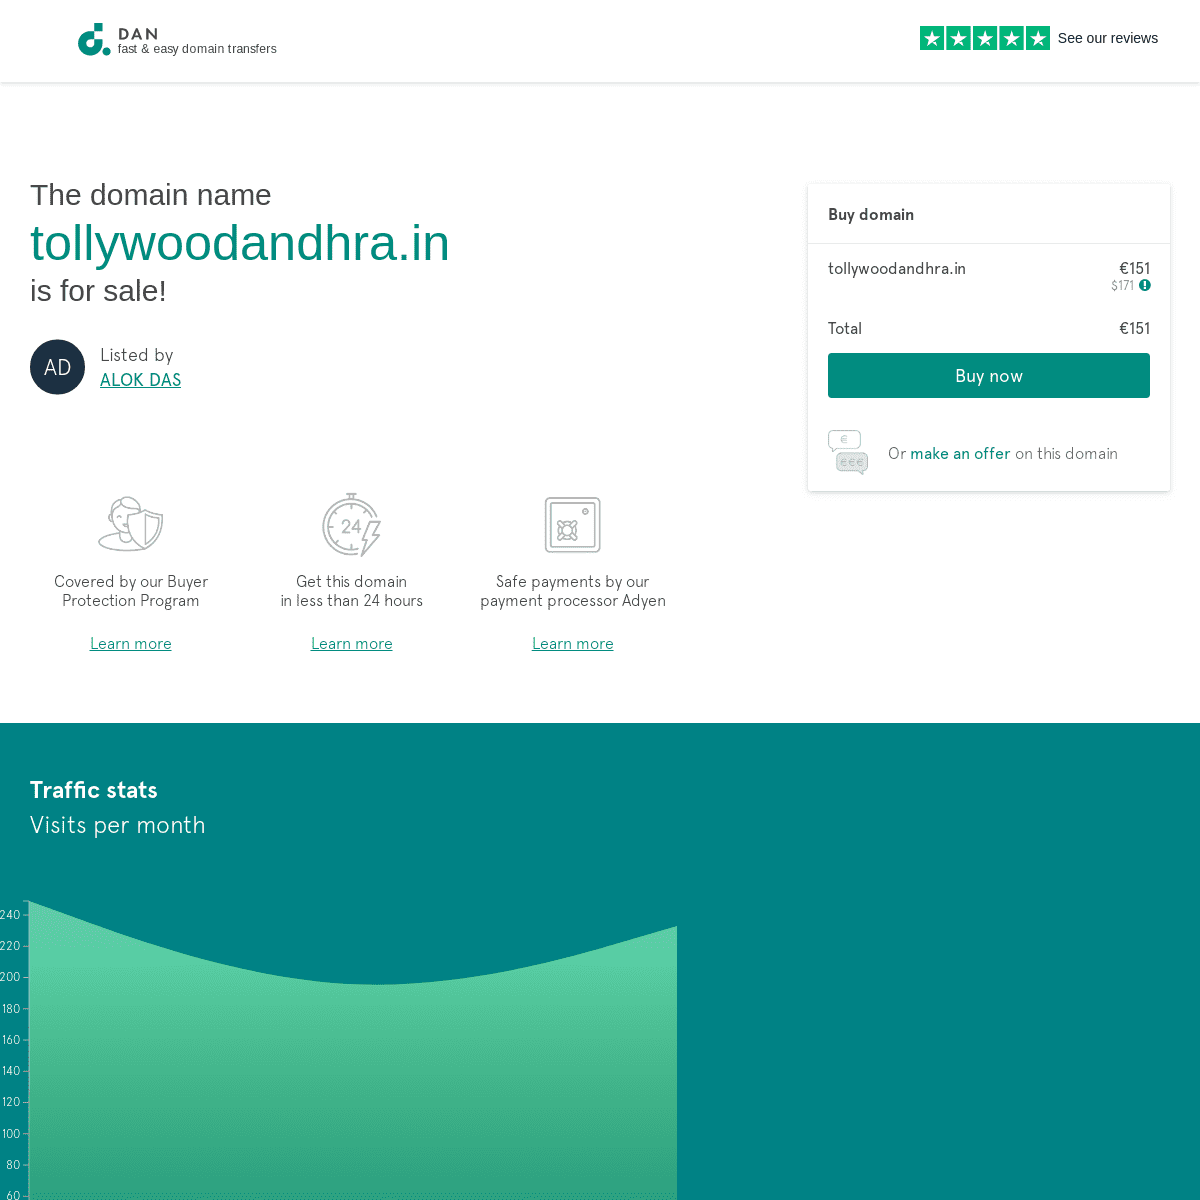 The domain name tollywoodandhra.in is for sale | DAN.COM